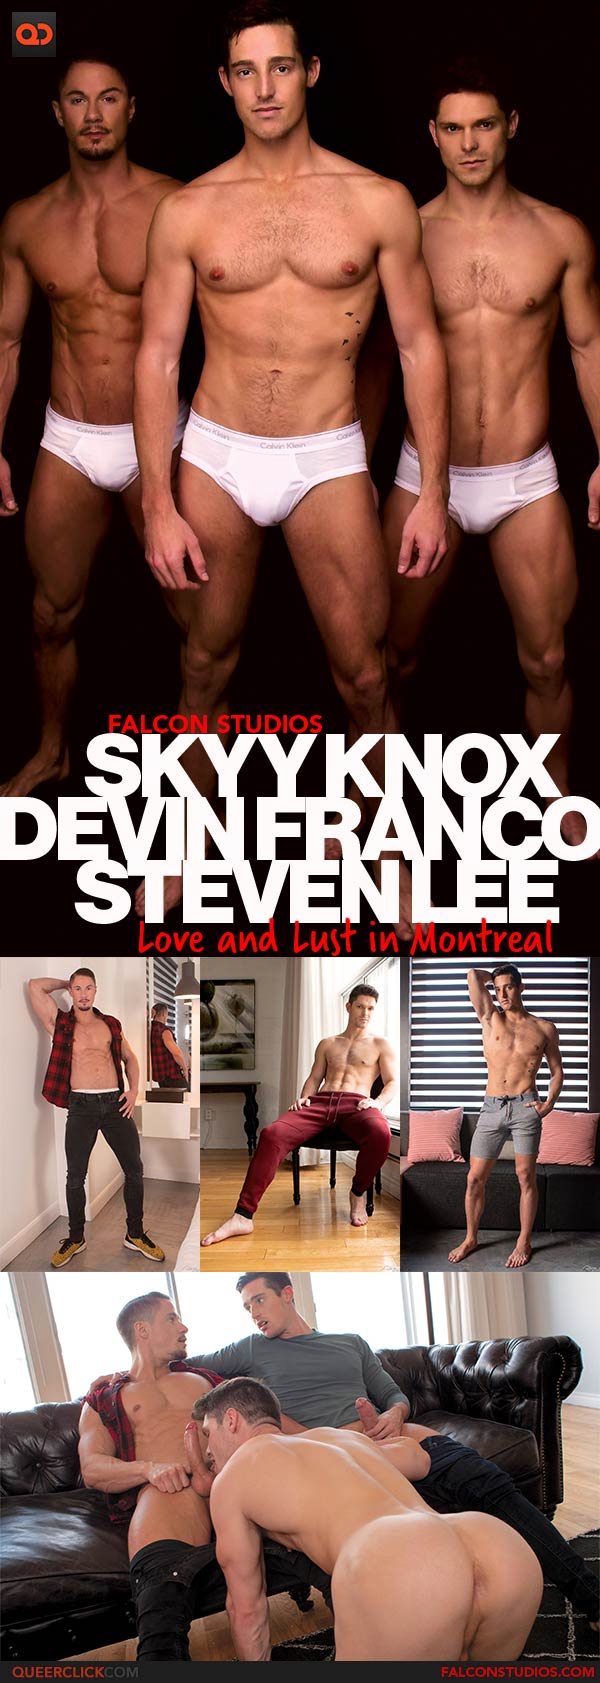 Falcon Studios: Skyy Knox, Devin Franco and Steven Lee -  Love and Lust in Montreal